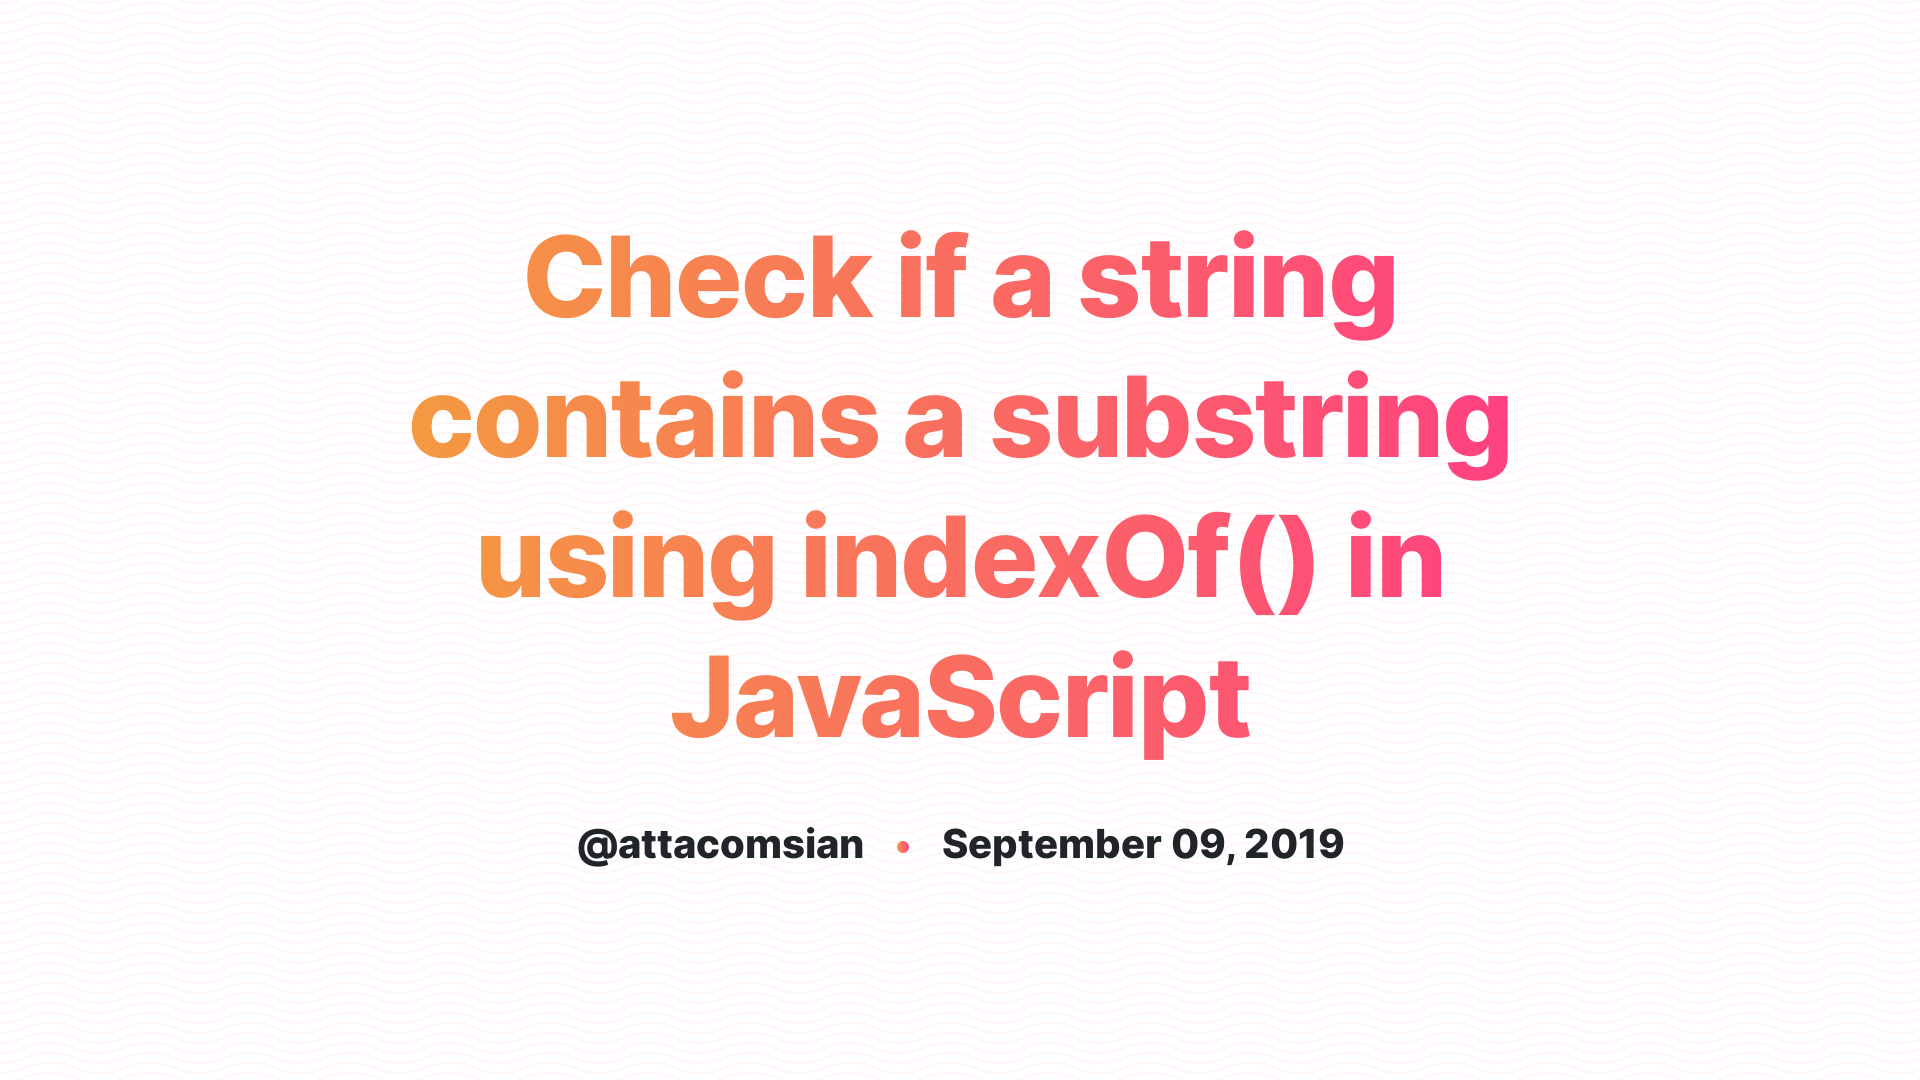 Check if a string contains a substring using indexOf in JavaScript